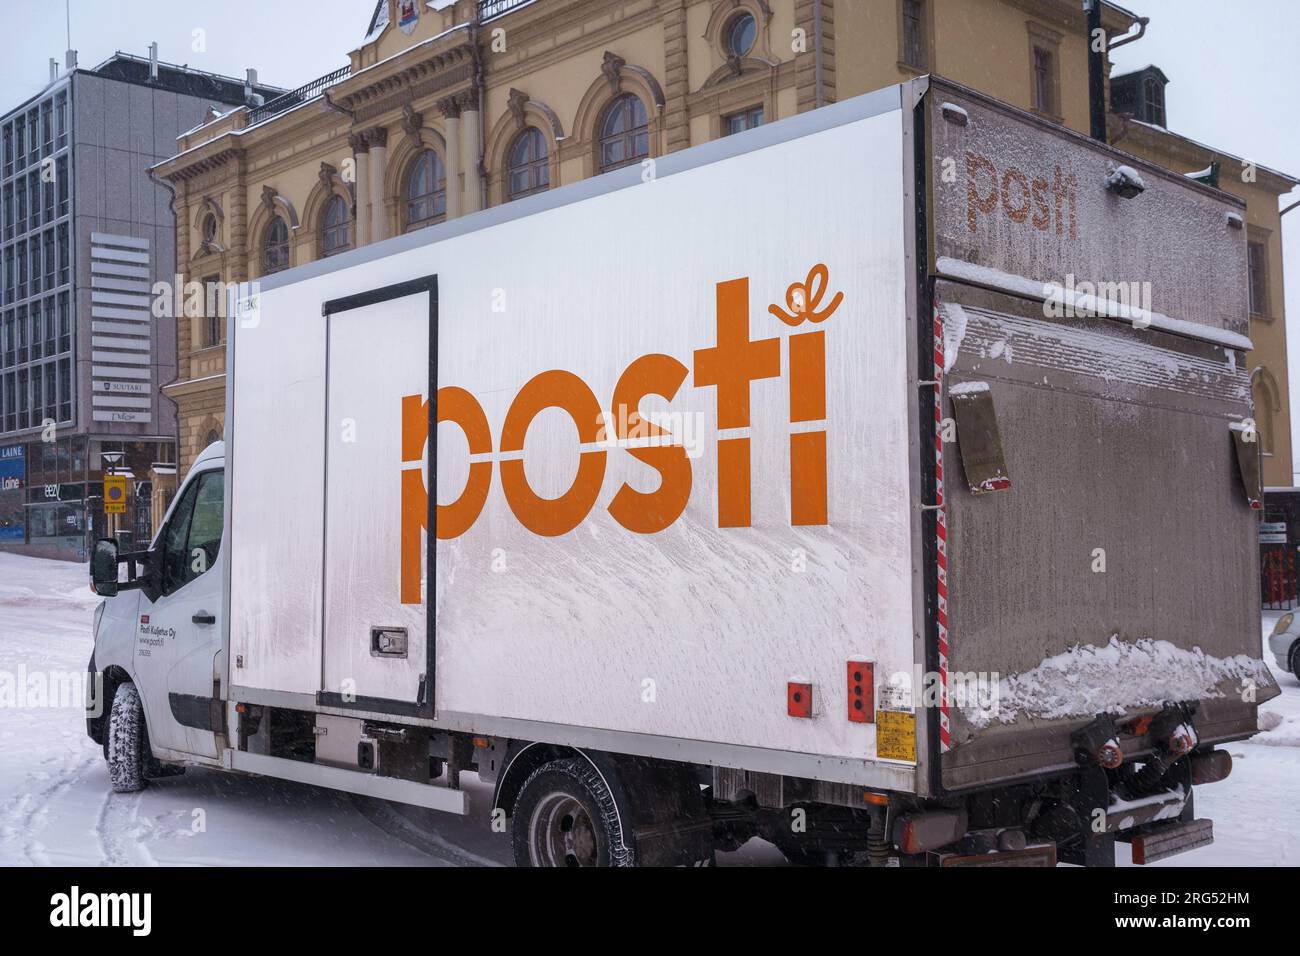 Delivery truck of the Posti group, the main Finnish postal service parked on the street in winter. Hameenlinna, Finland. February 23, 2023. Stock Photo